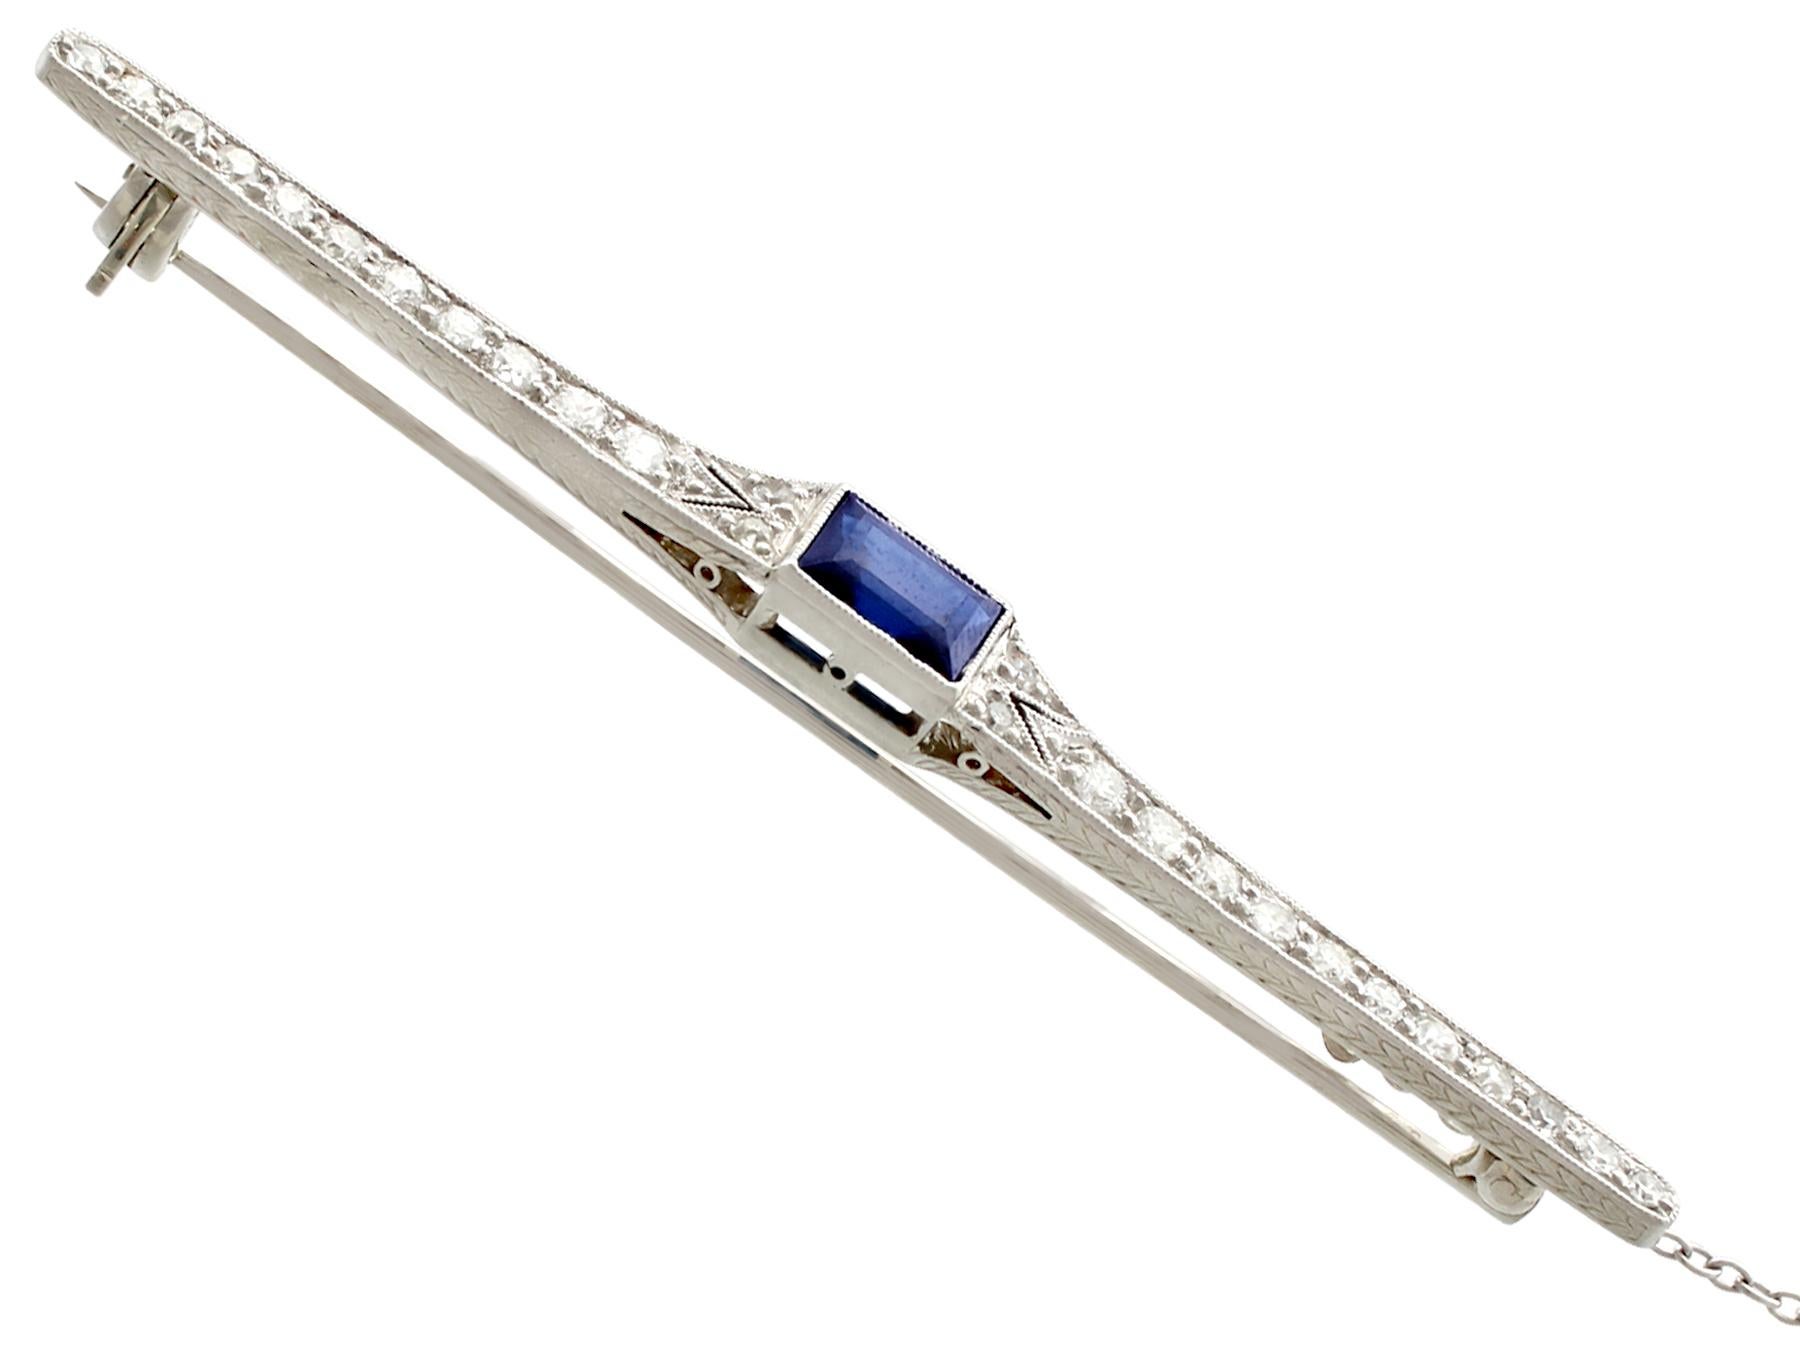 An impressive antique French 1.04 carat sapphire and 1.20 carat diamond, 18 karat white gold and platinum set bar brooch; part of our diverse antique jewellery collections.

This fine and impressive sapphire and diamond bar brooch has been crafted